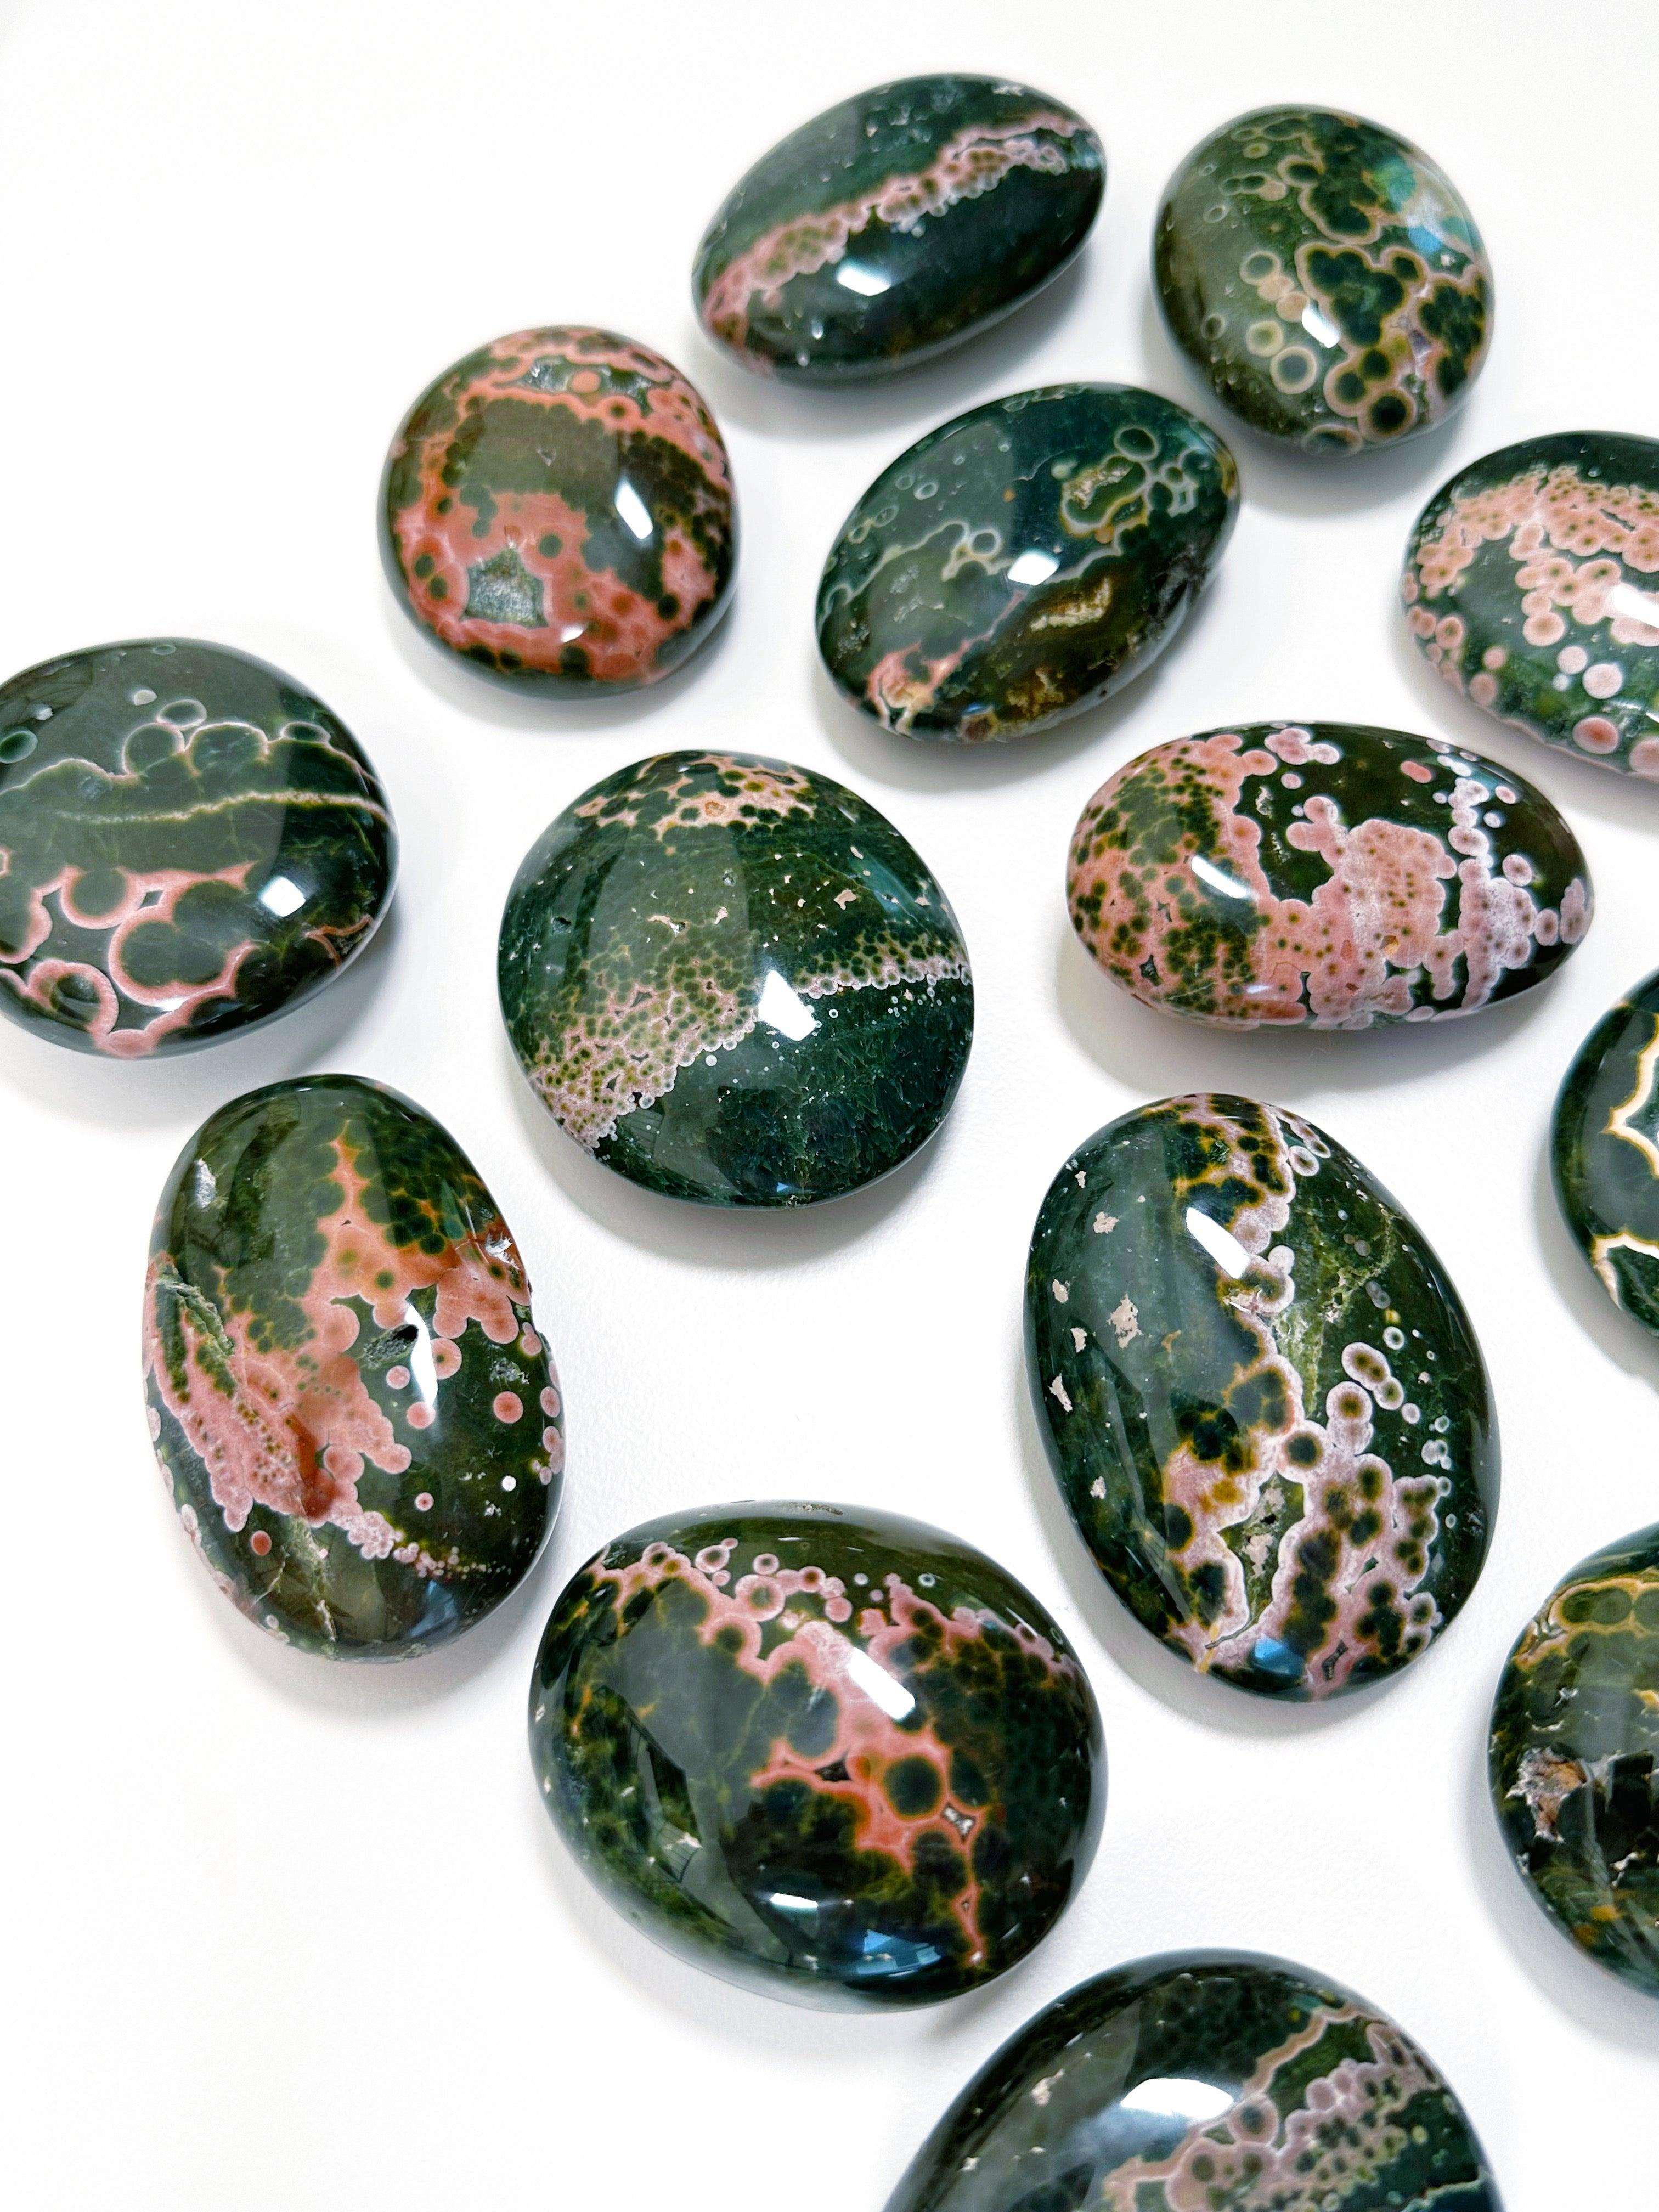 KABAMBY OCEAN JASPER PALM STONE (1st QUALITY) - emotional support, kabamby, kabamby ocean jasper, north carolina gem show, ocean jasper, palm stone, palmstone, recently added - The Mineral Maven